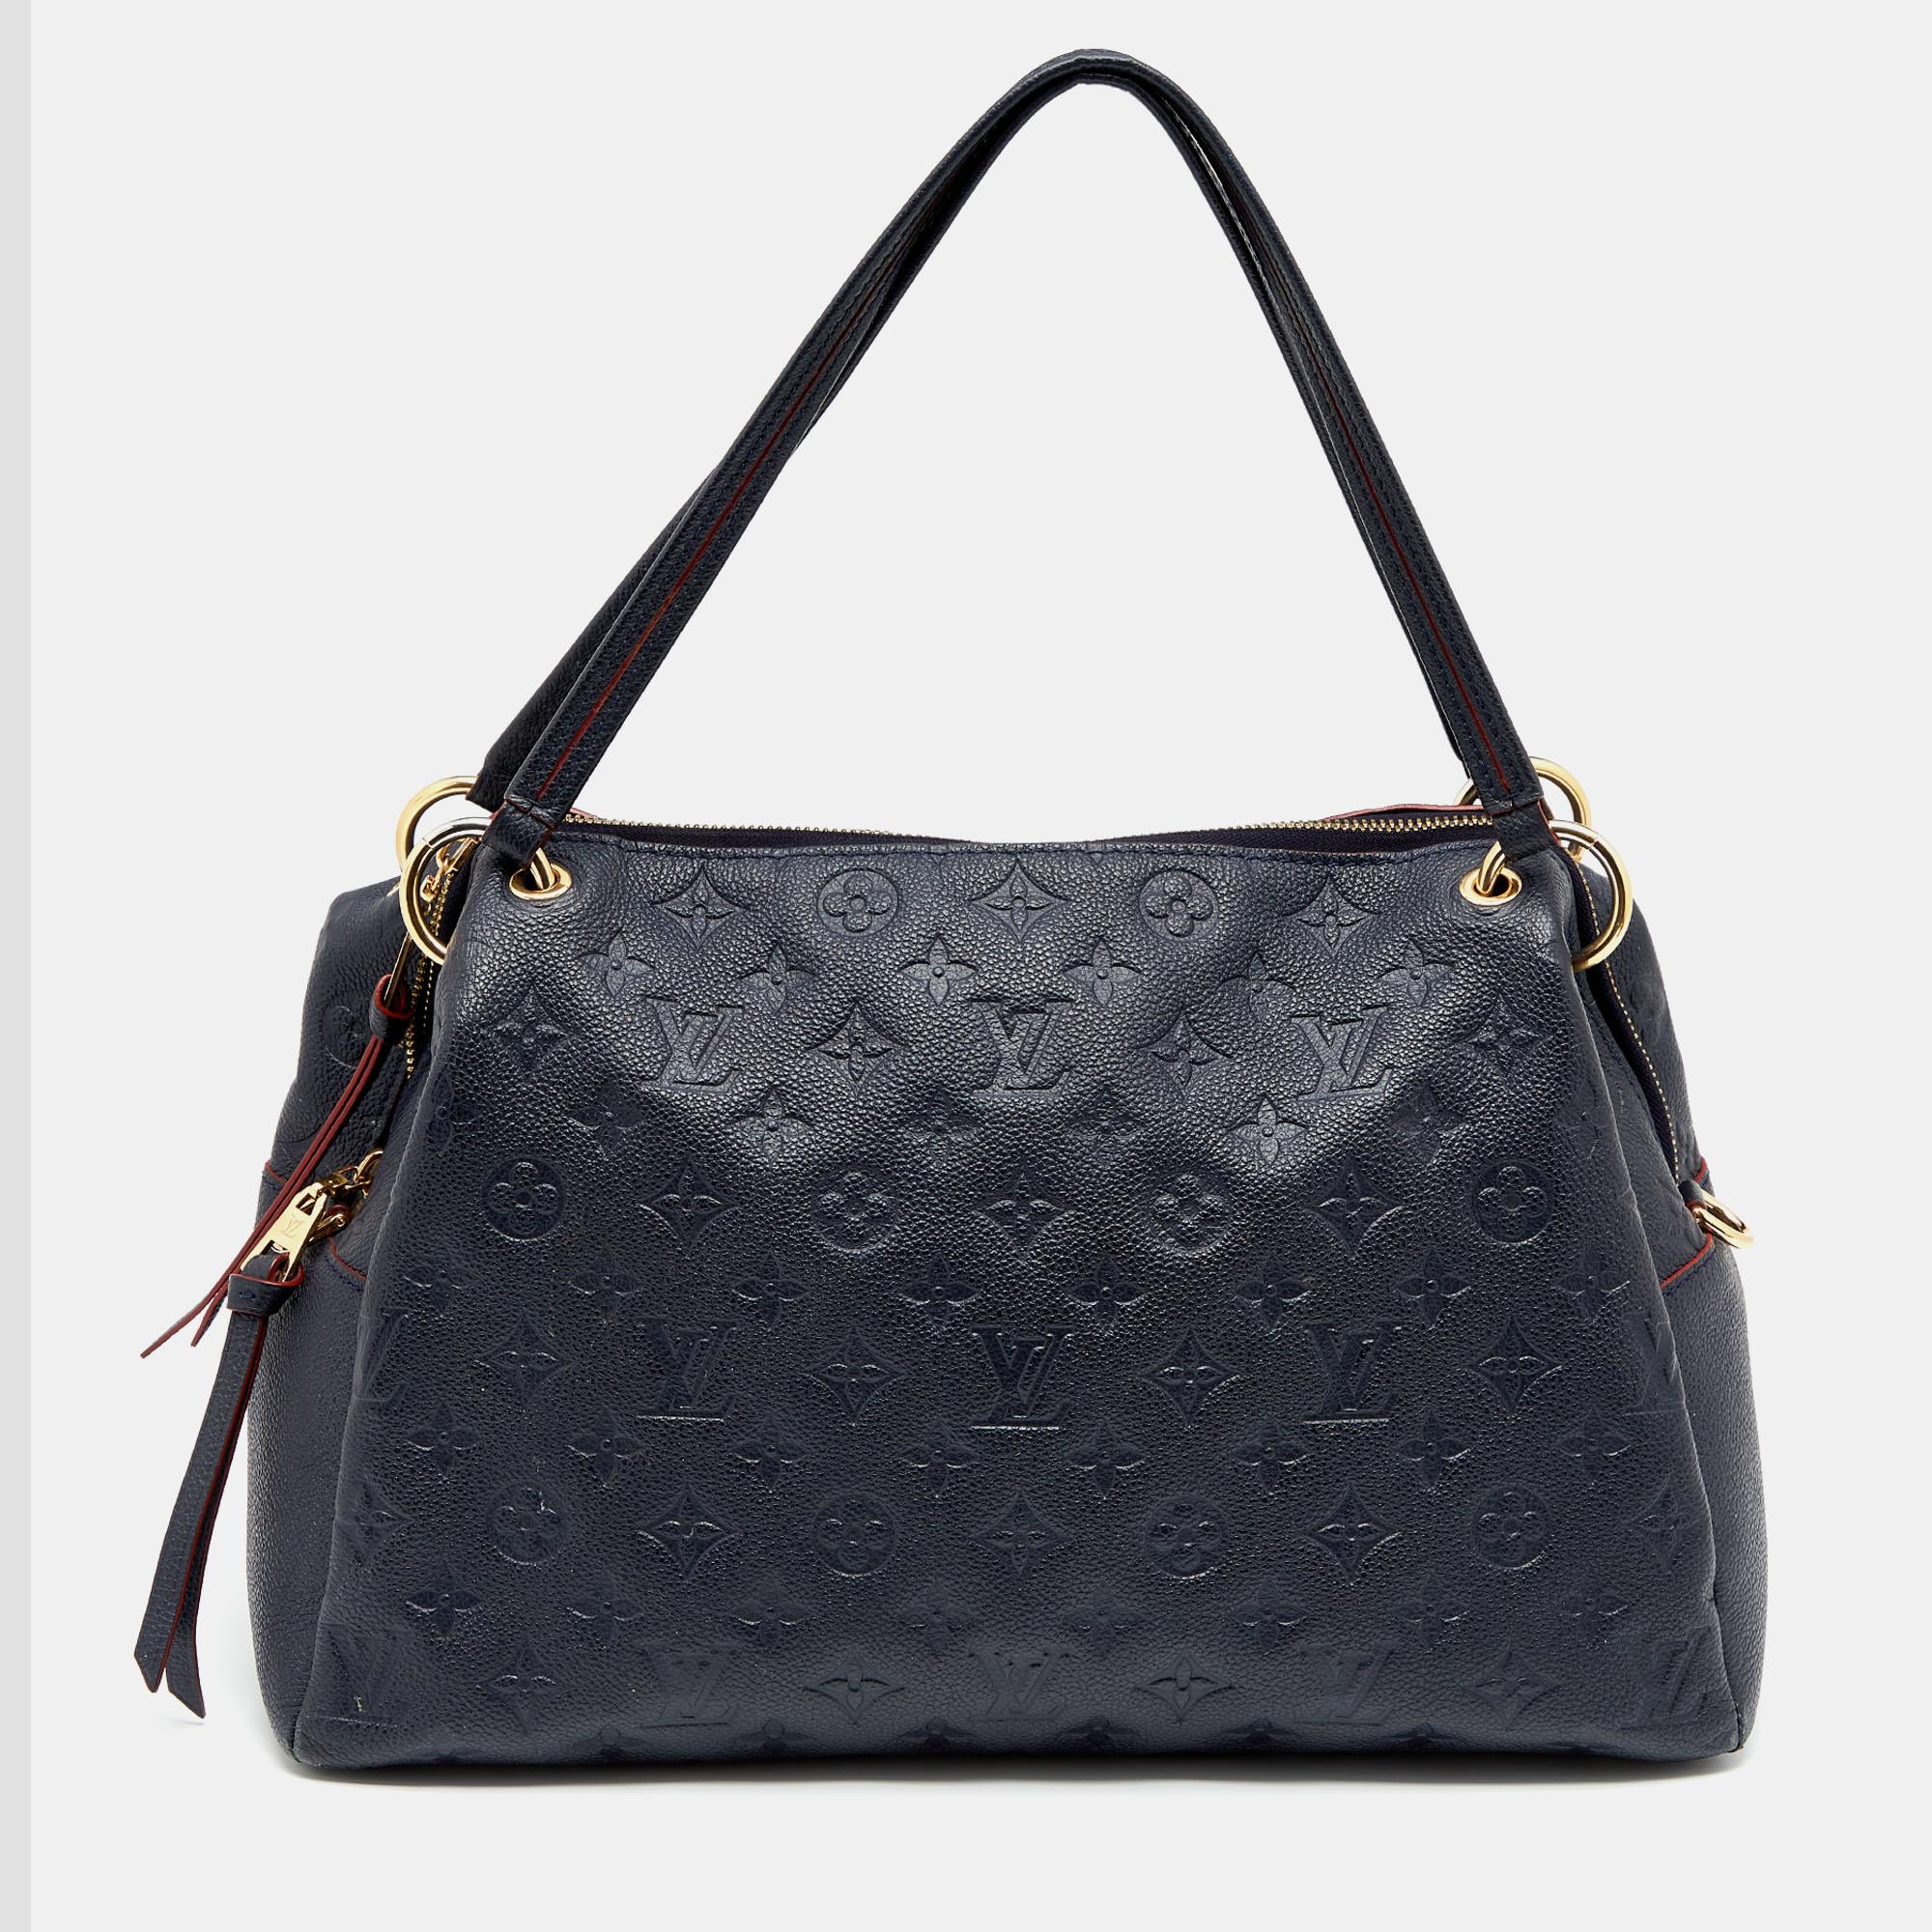 Louis Vuitton's handbags are popular owing to their high style and functionality. This Ponthieu bag, like all the other handbags, is durable and stylish. Crafted from Monogram Empreinte leather, the bag can be paraded using the top handle or